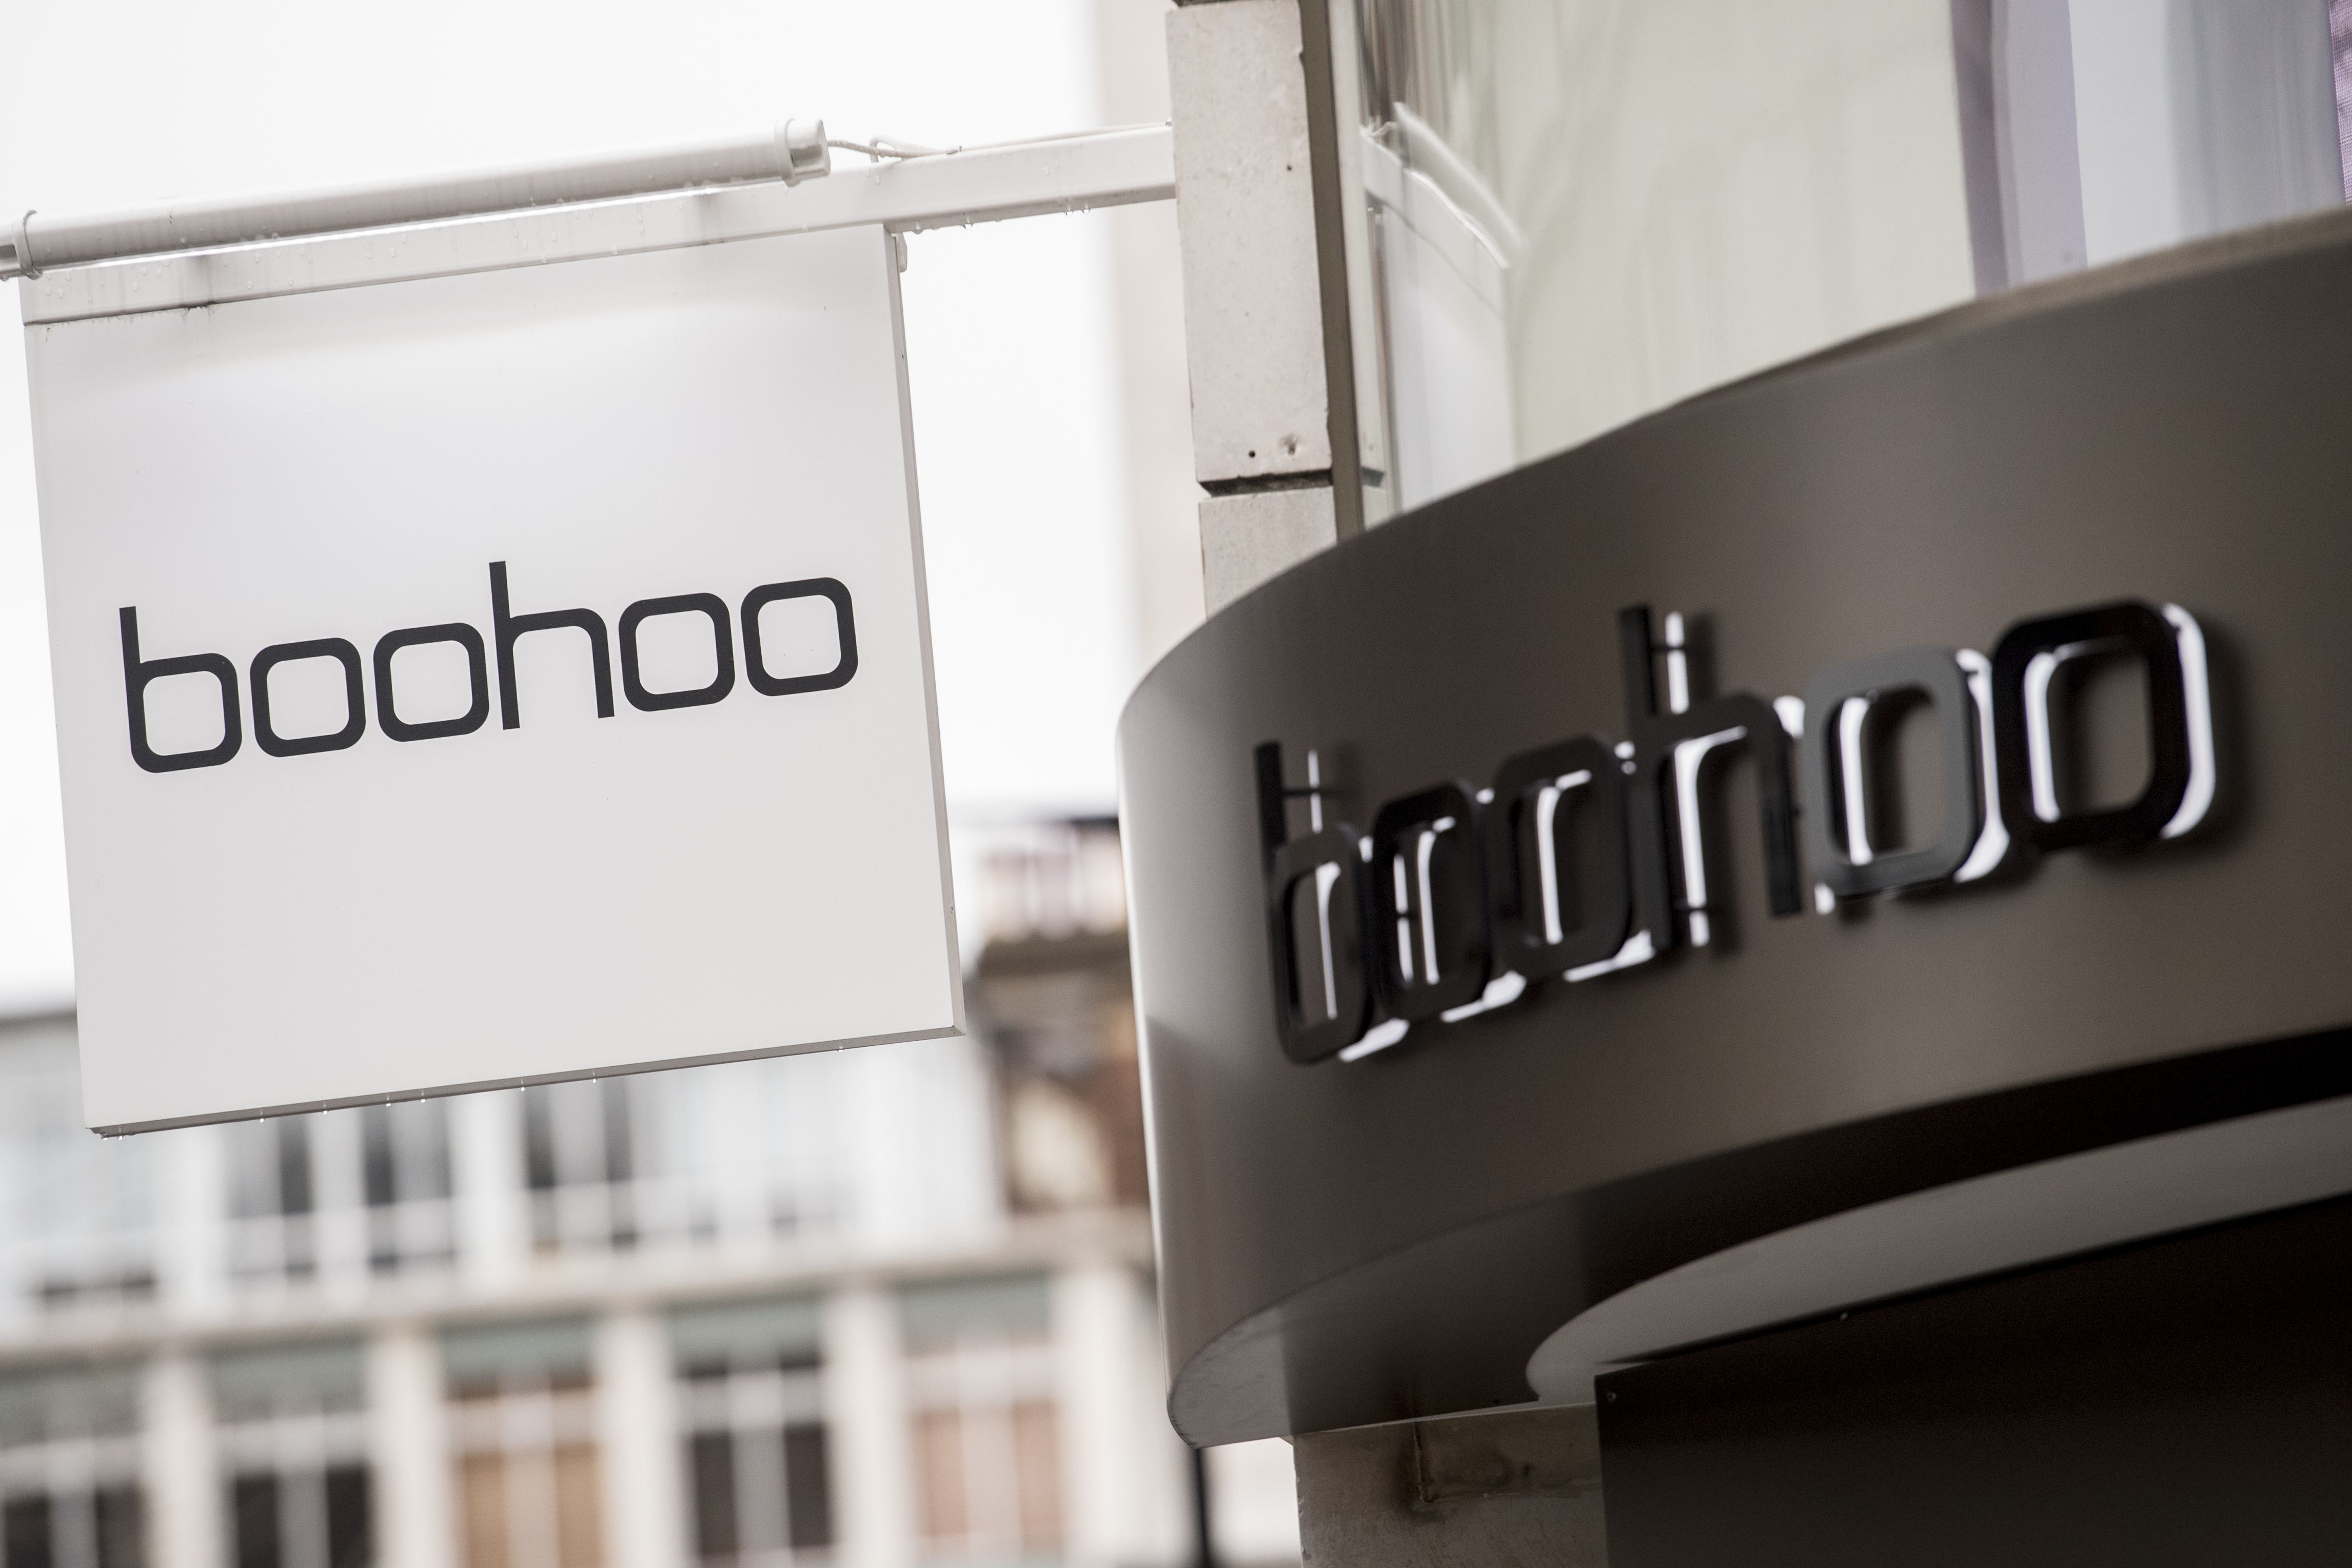 Boohoo’s top three bosses stand to get nearly £100 million from the scheme (Ian West/PA)